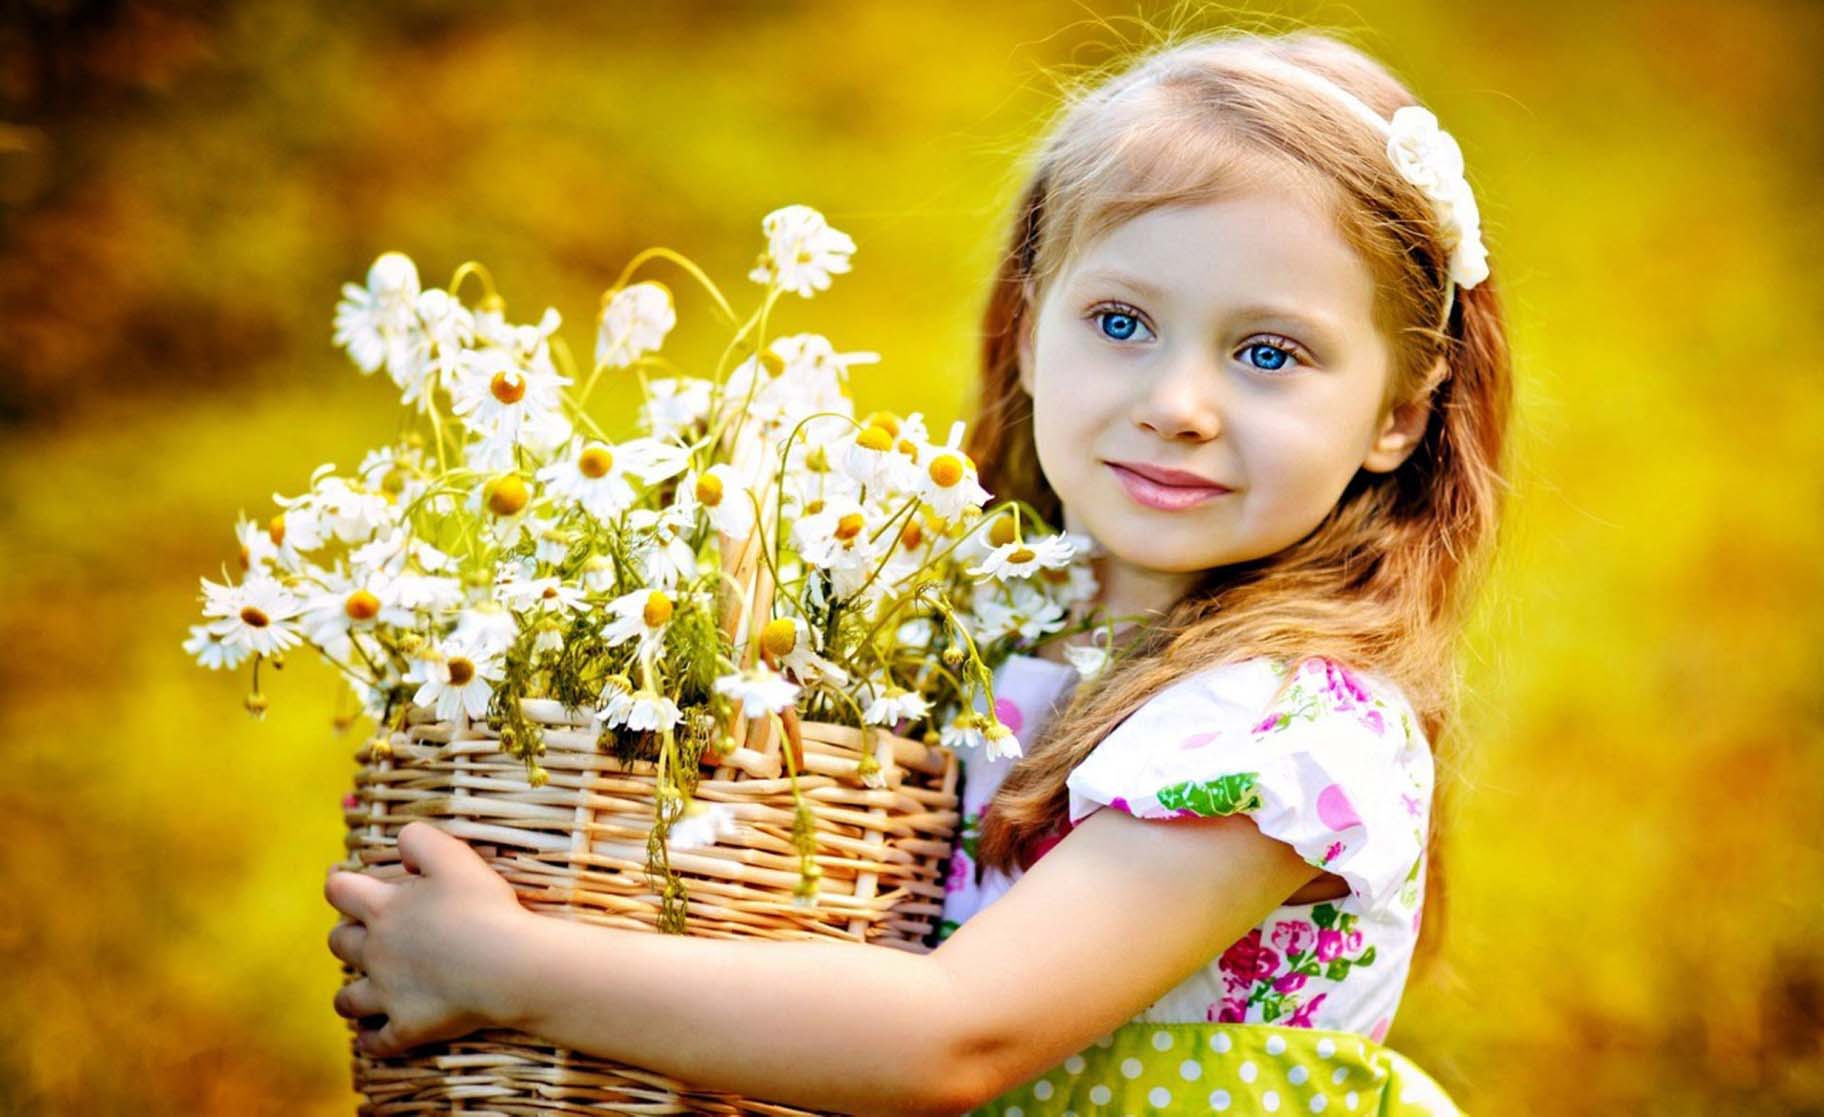 Pretty Girl Wallpaper - Small Cute Girl With Flowers - HD Wallpaper 